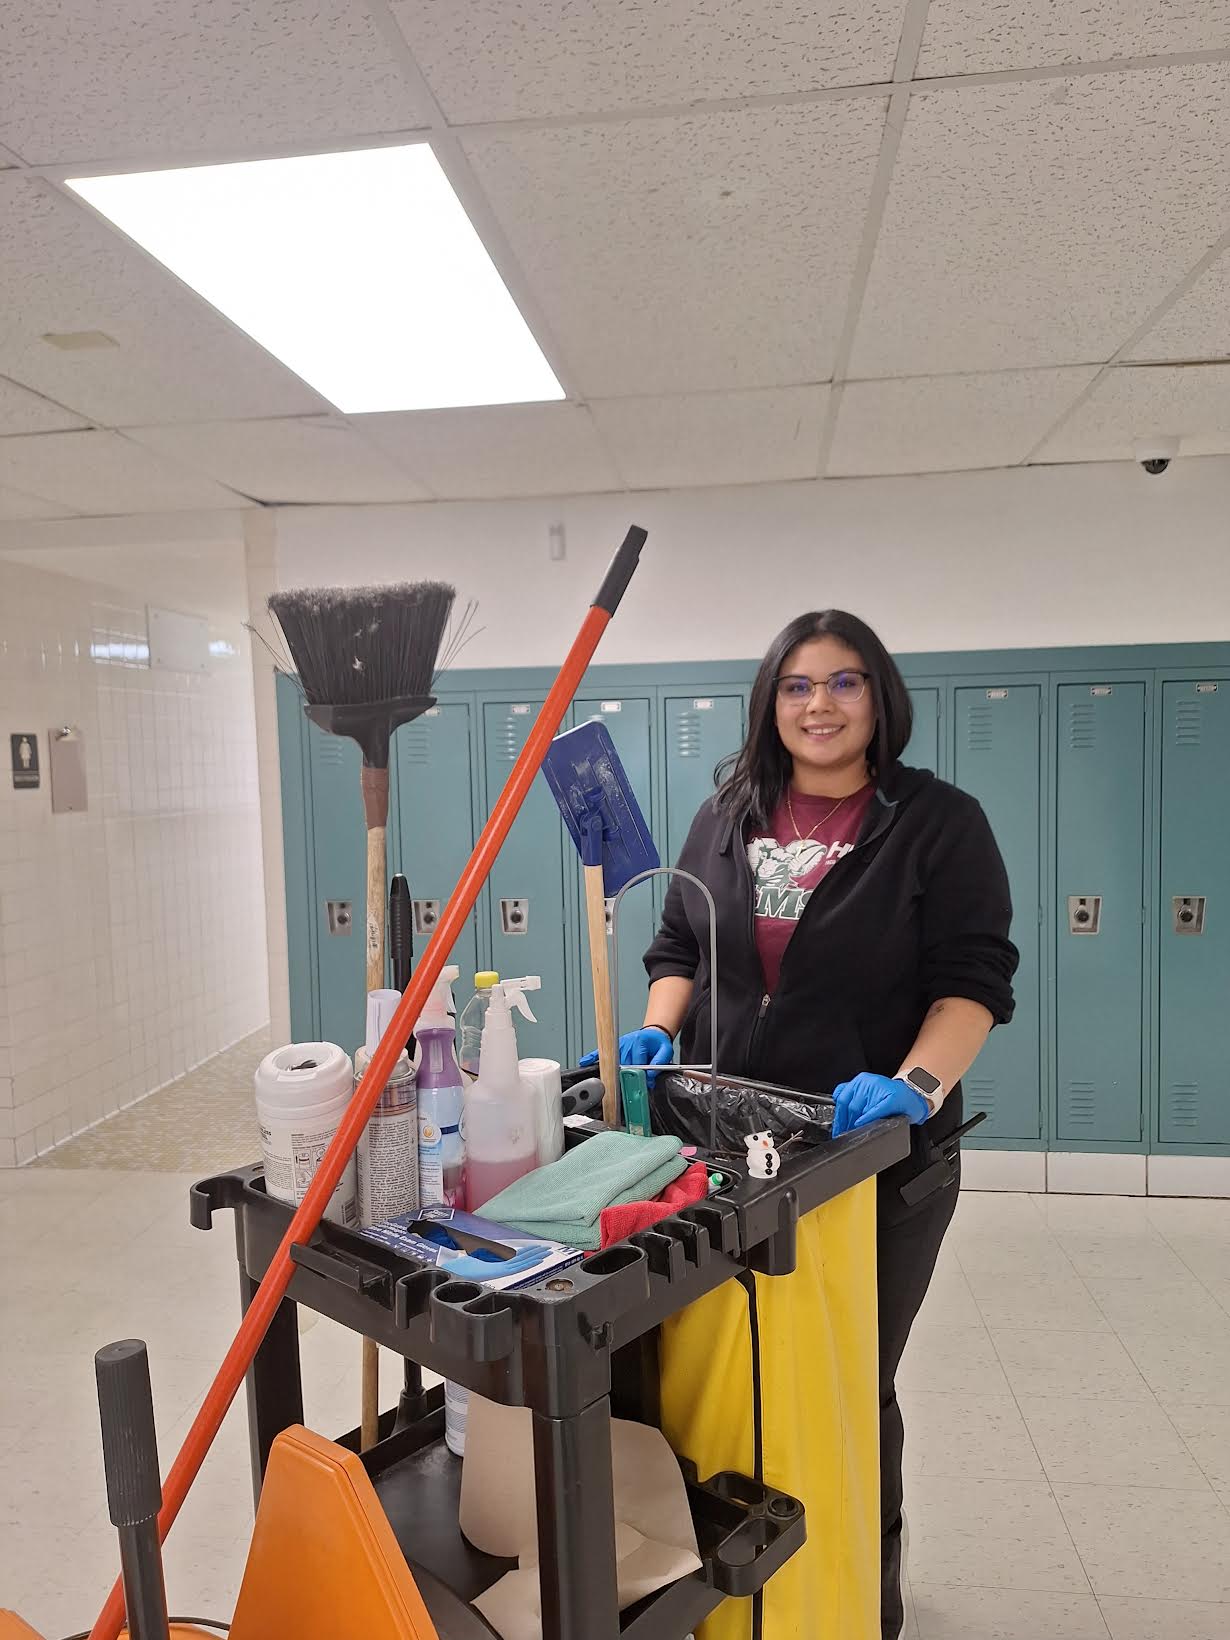 Sofia uses her cart to help clean around the school.